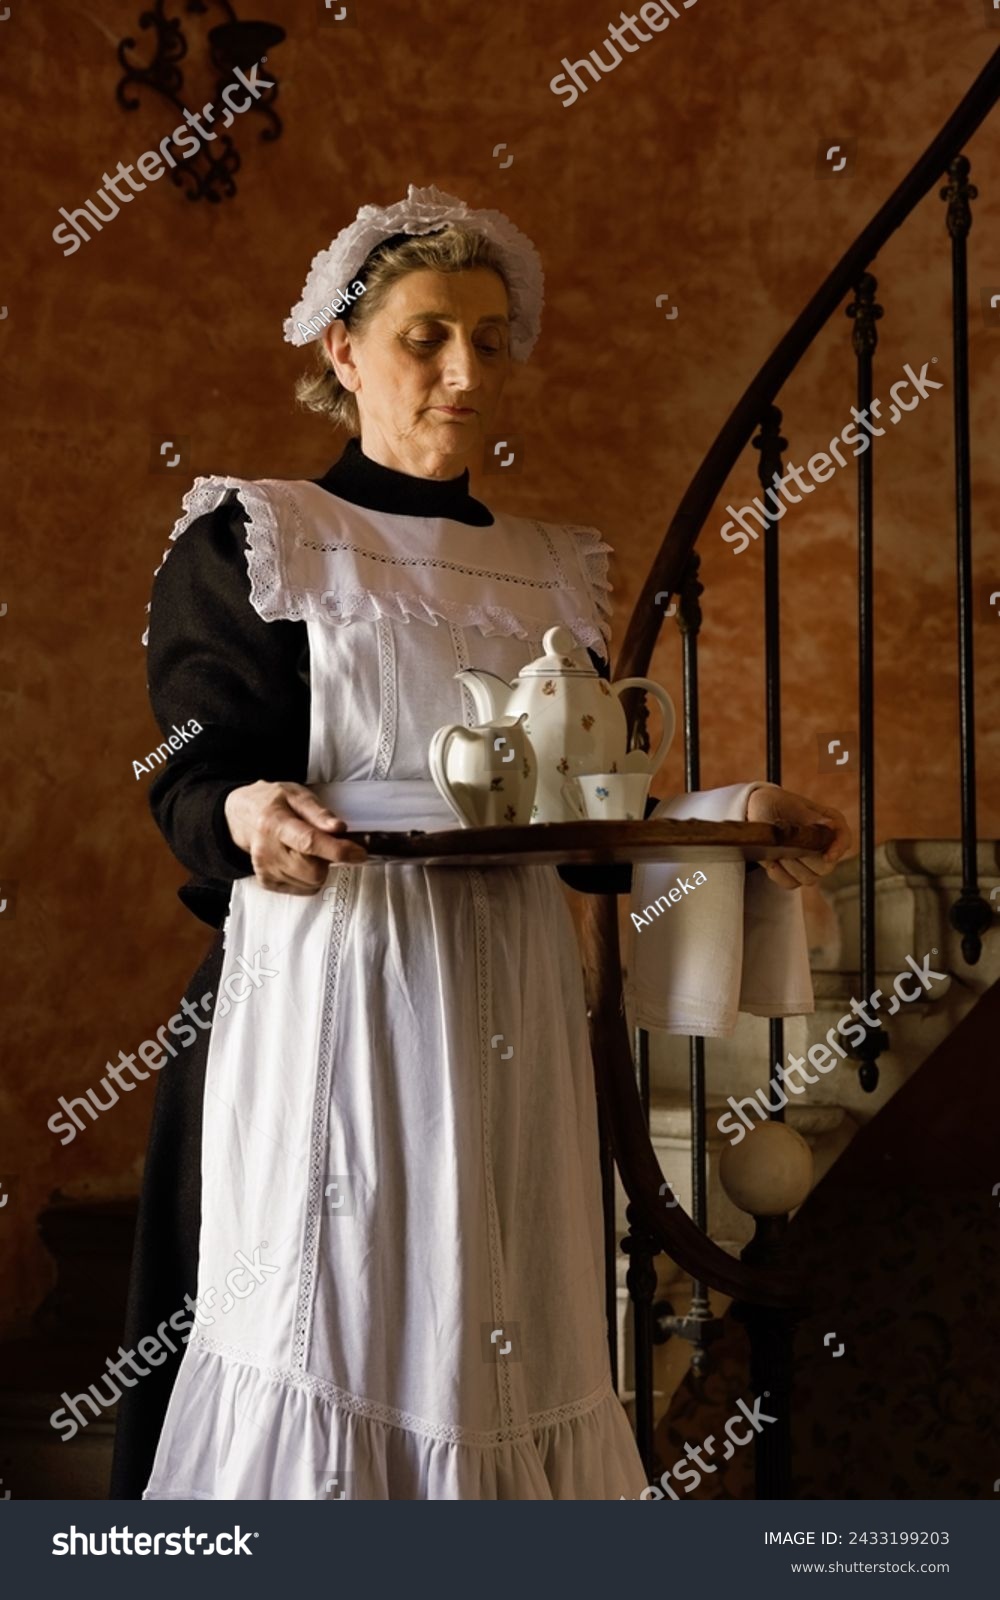 Victorian maid or servant in black dress, lace cap and white apron working in a 19th century interior #2433199203